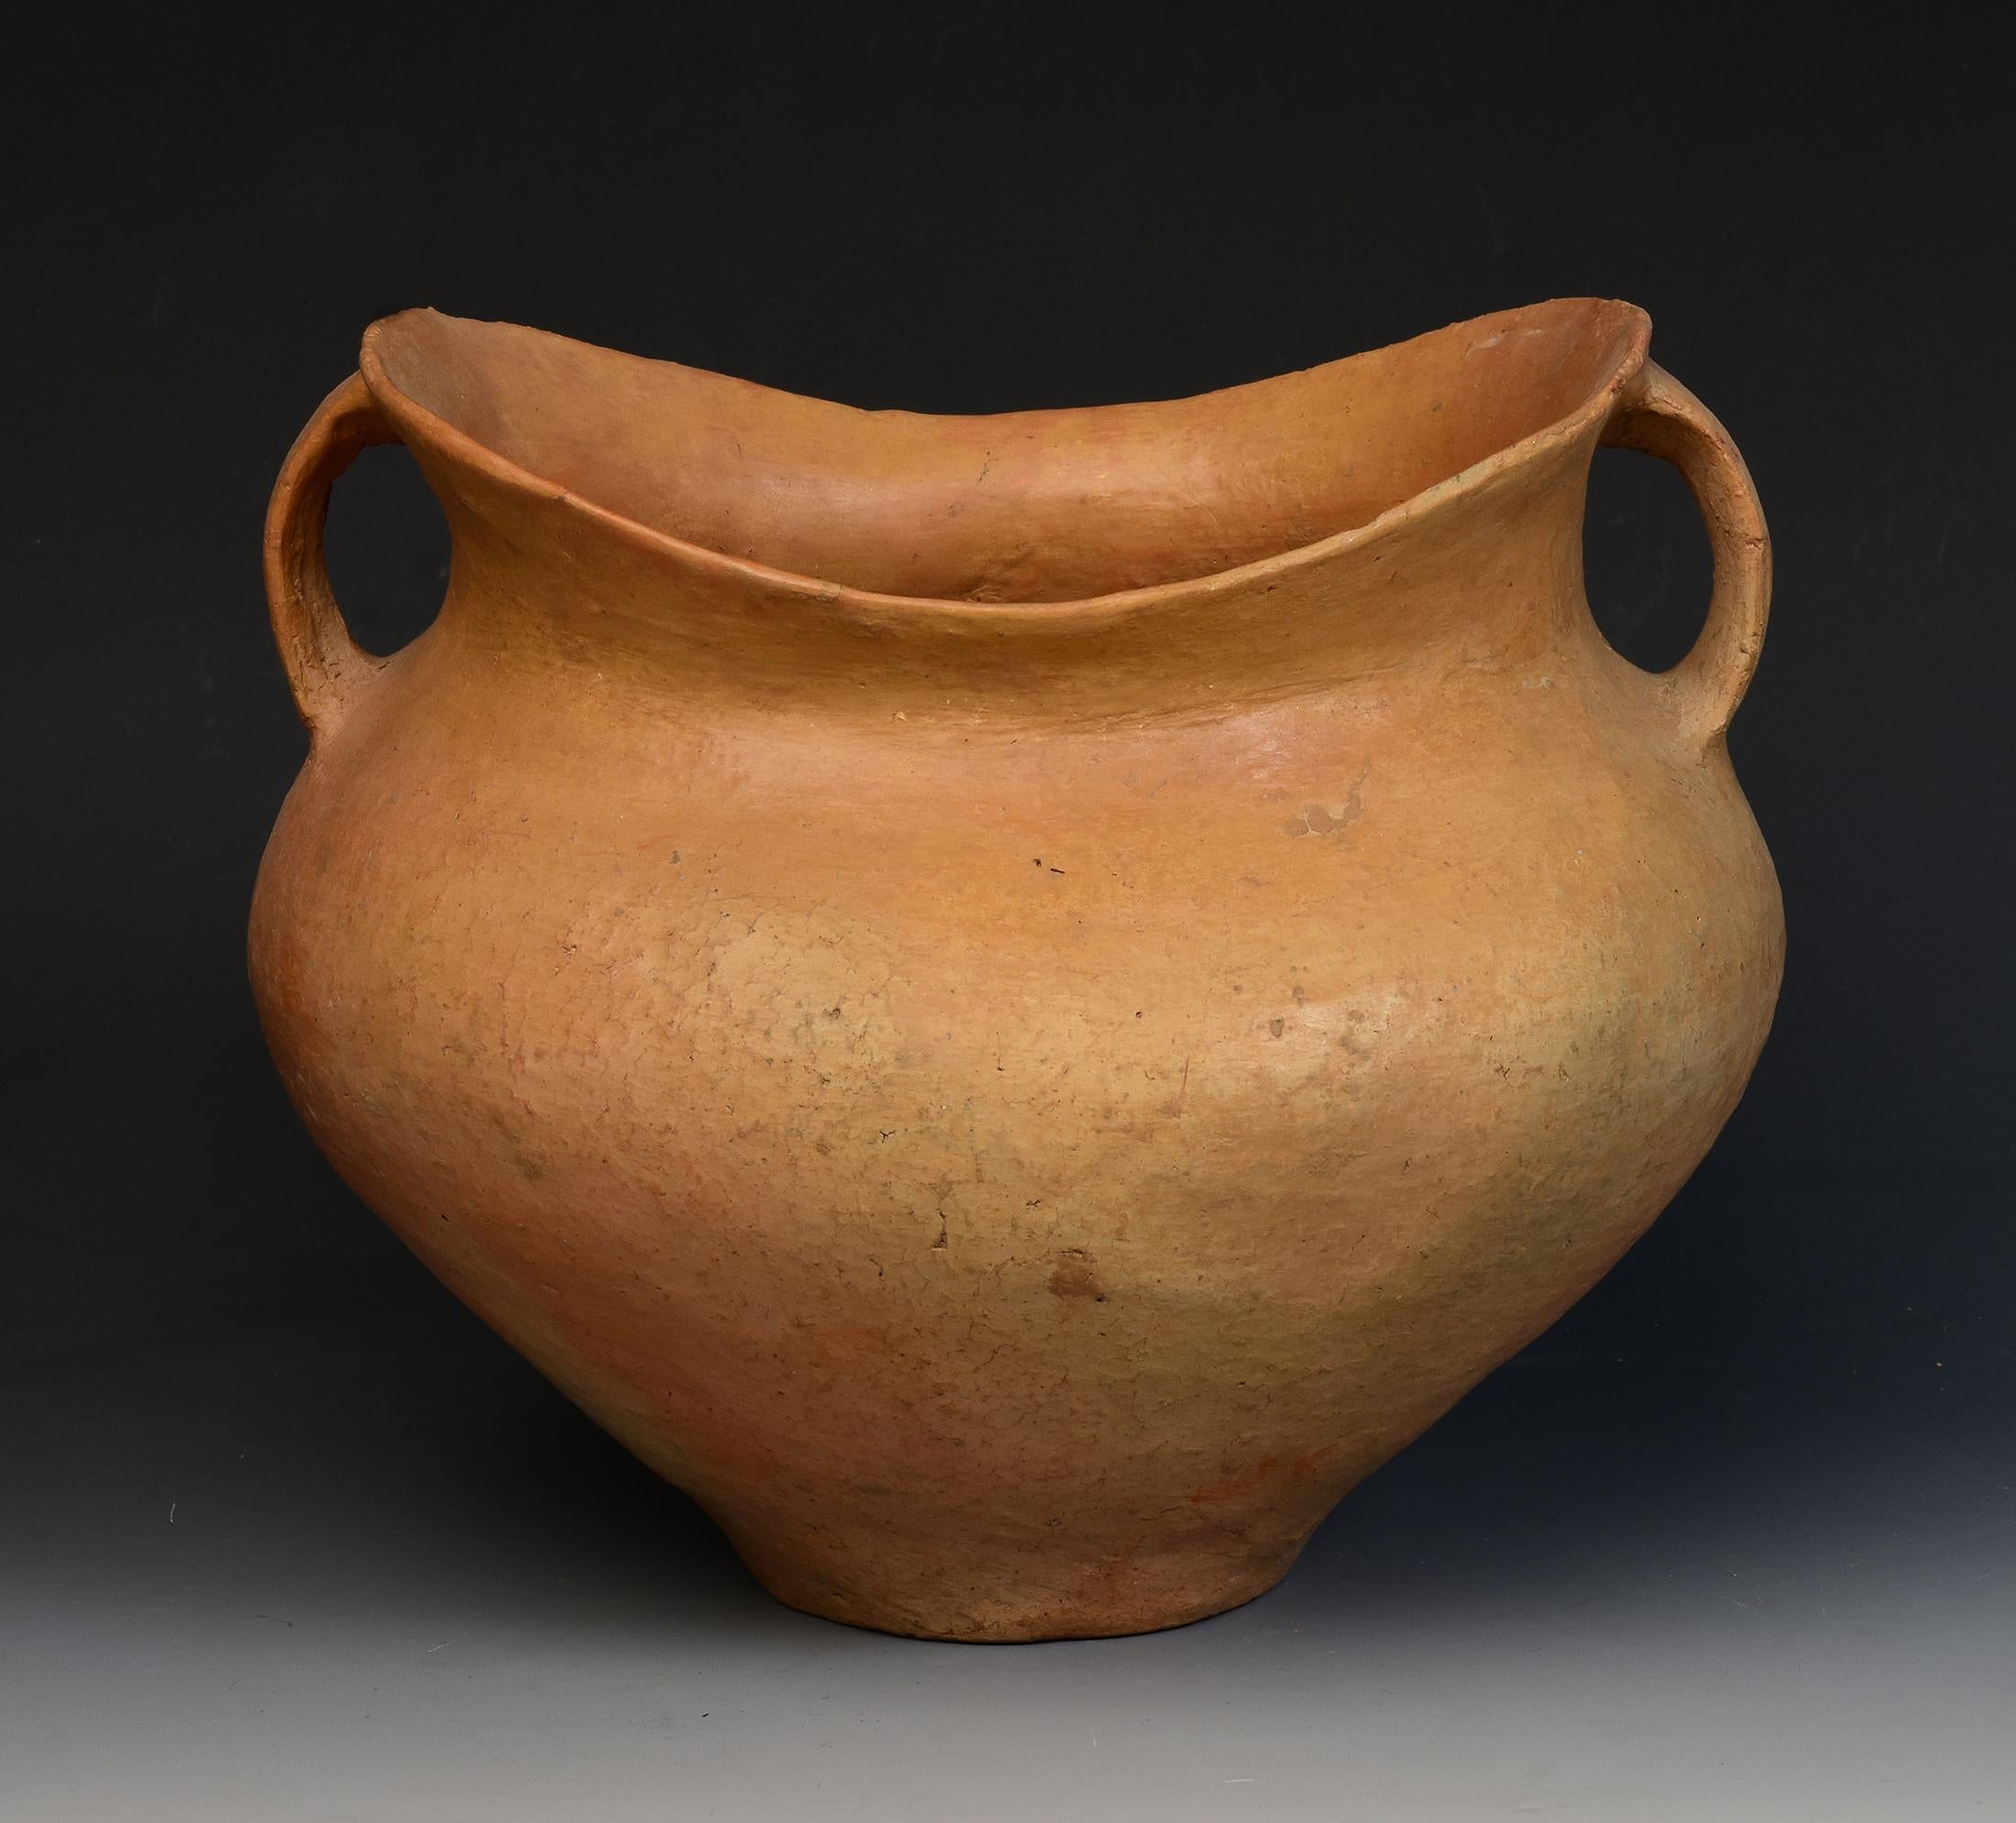 Antique Chinese Neolithic Siwa culture pottery Amphora jar.

Age: China, Neolithic period, 1350 B.C.
Size: Height 20.2 cm. / Width 24.3 cm
Condition: Well-preserved old burial condition overall.

100% satisfaction and authenticity guaranteed